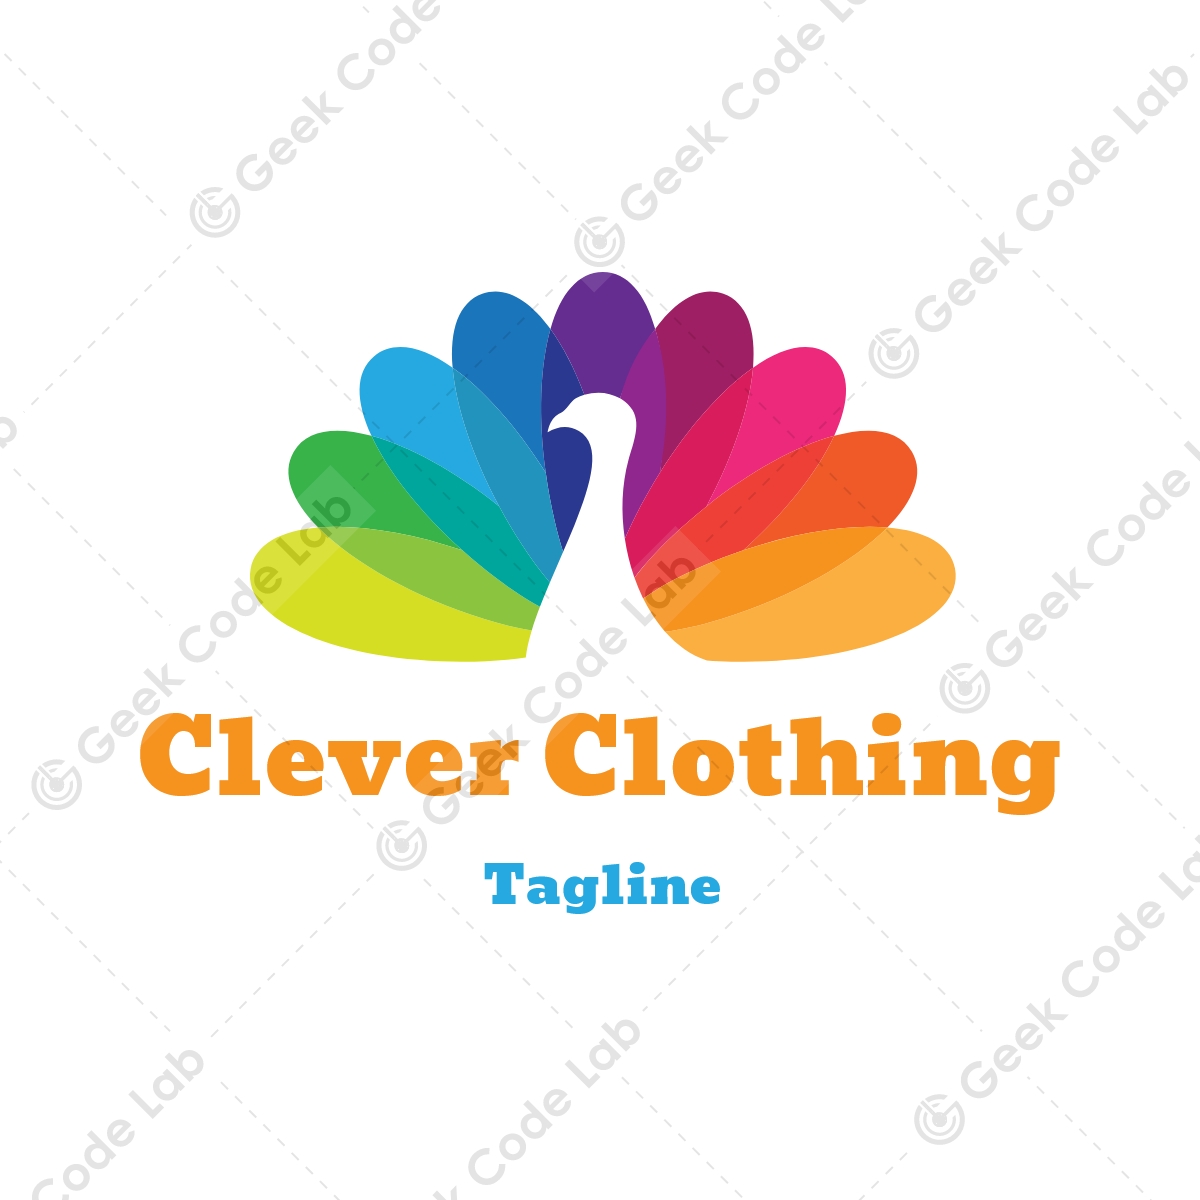 Clever Clothing